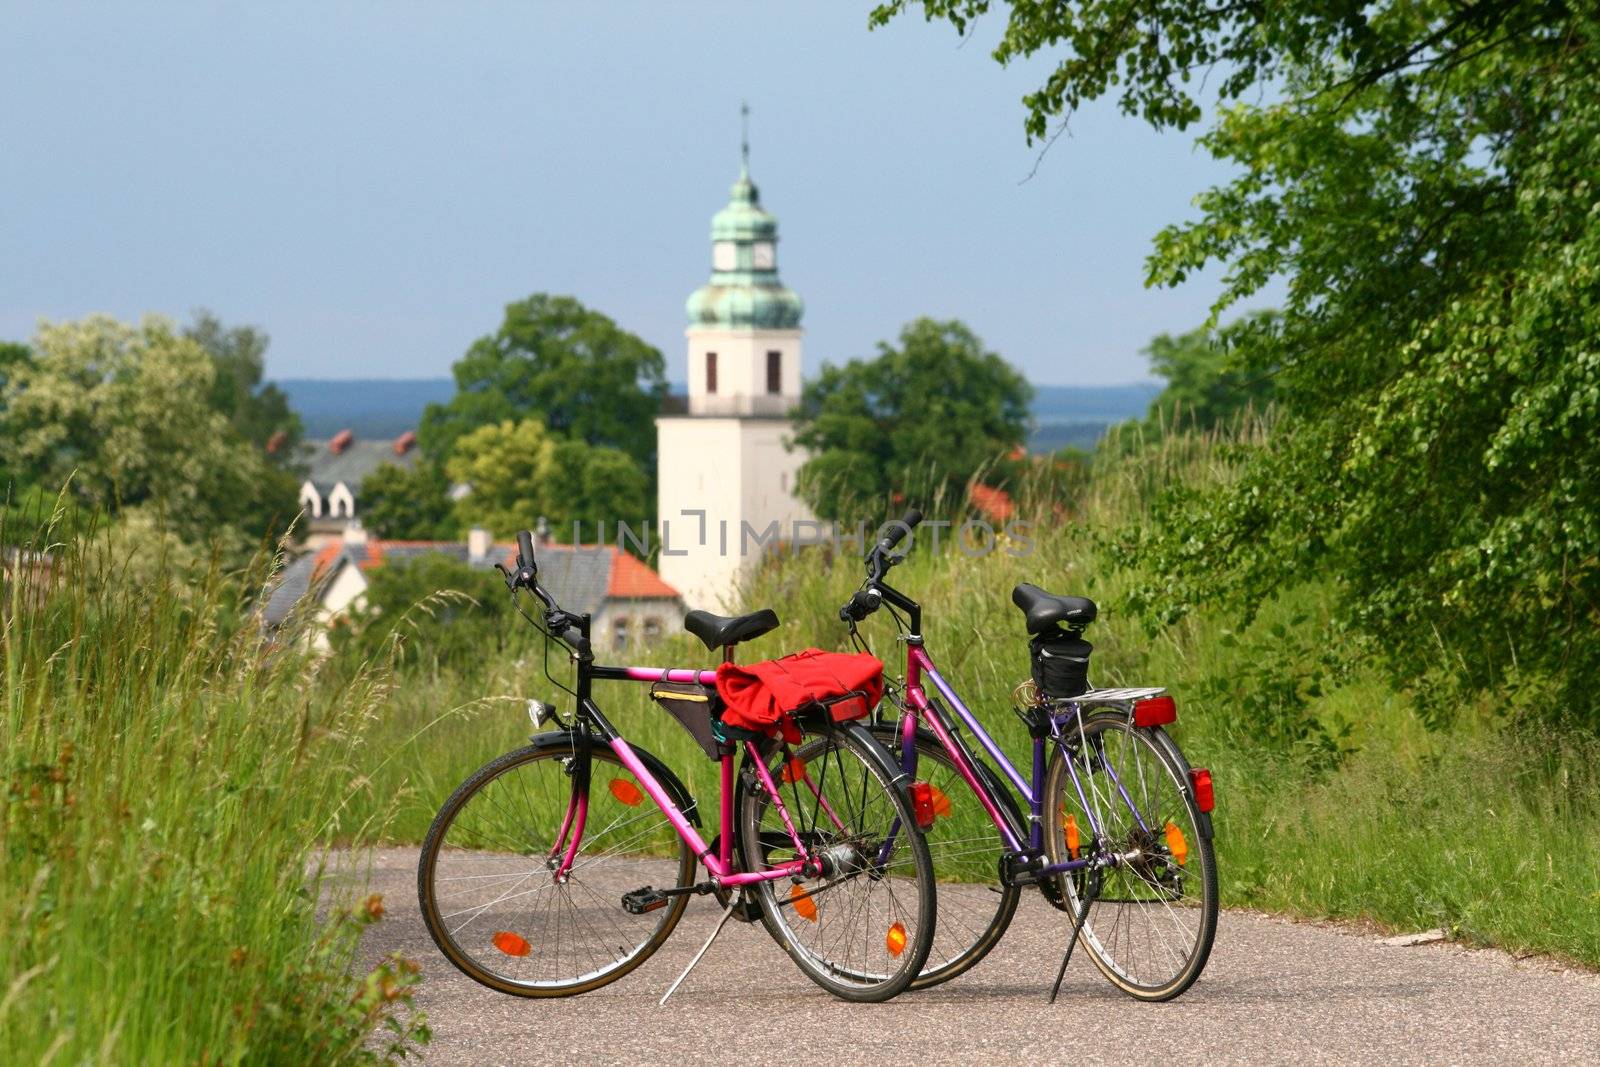 Two bikes standing on the road with a church in background - break during bicycle trip